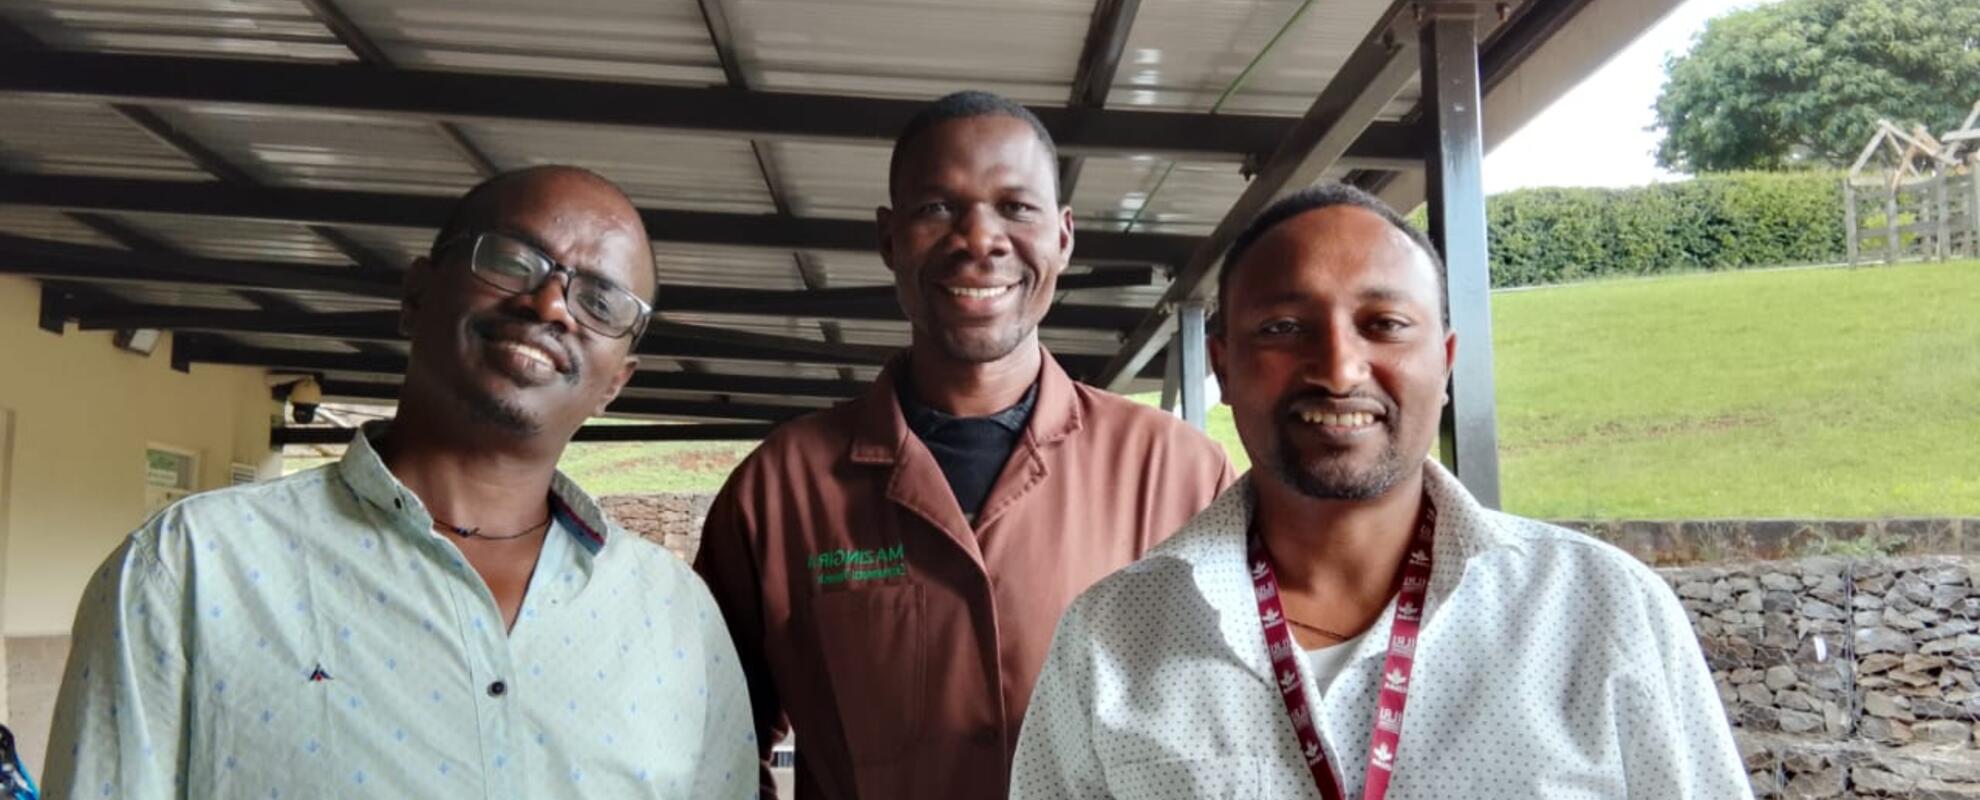 PhD students Demissie Dawana (left) and Tegegn Fantahun (far right) from the Mazingira Centre spent time with Loyapin Bondé (center) to demonstrate and explain how the biodigester is an effective tool to reduce manure emissions and transform manure into fertilizer. Photo courtesy of Loyapin Bondé